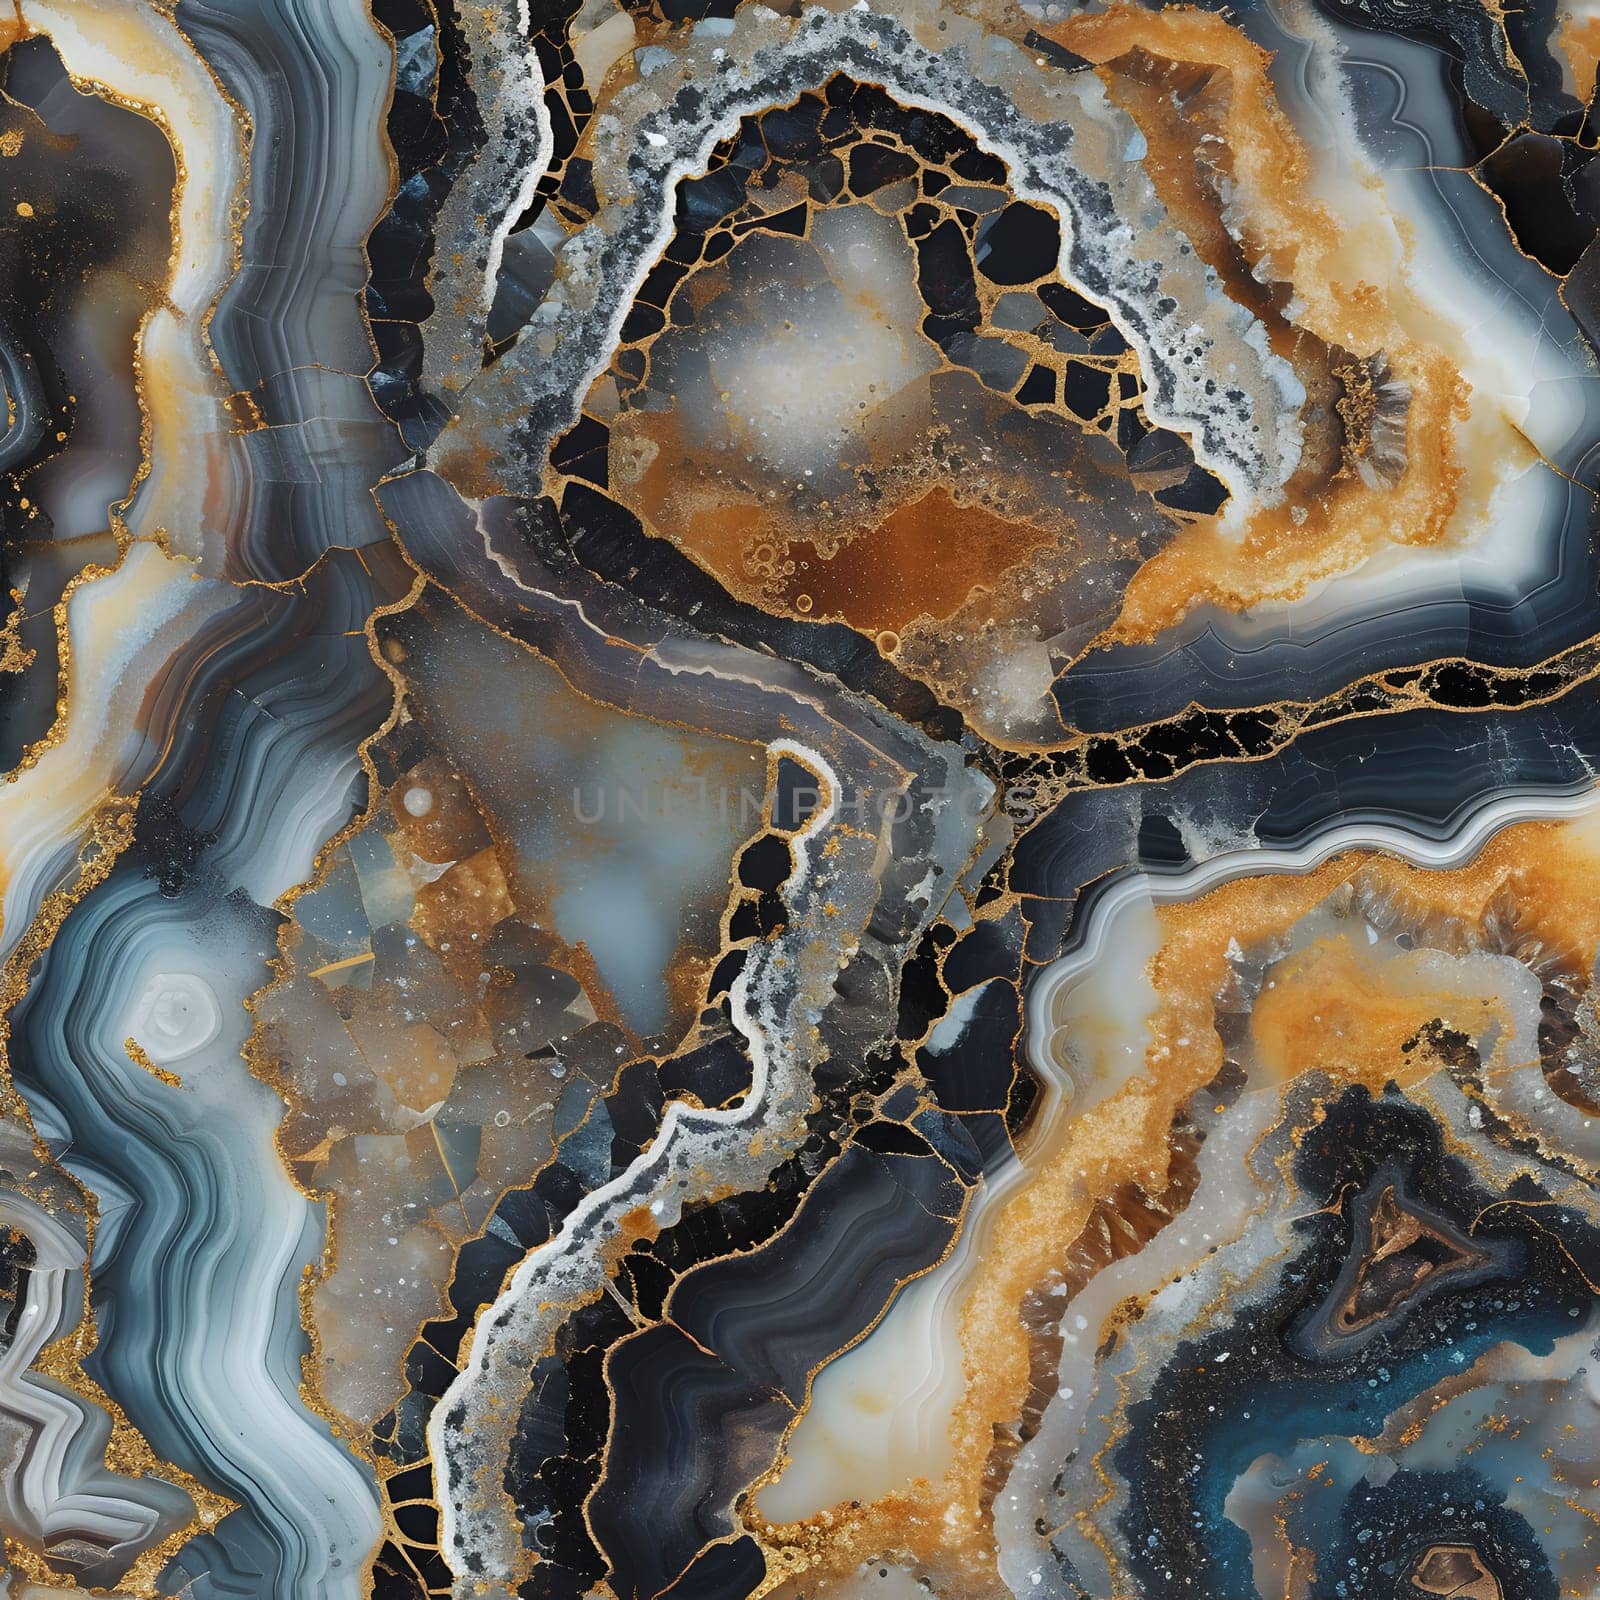 Geode rock seamless texture, background and wallpaper. Neural network generated image. Not based on any actual scene or pattern.